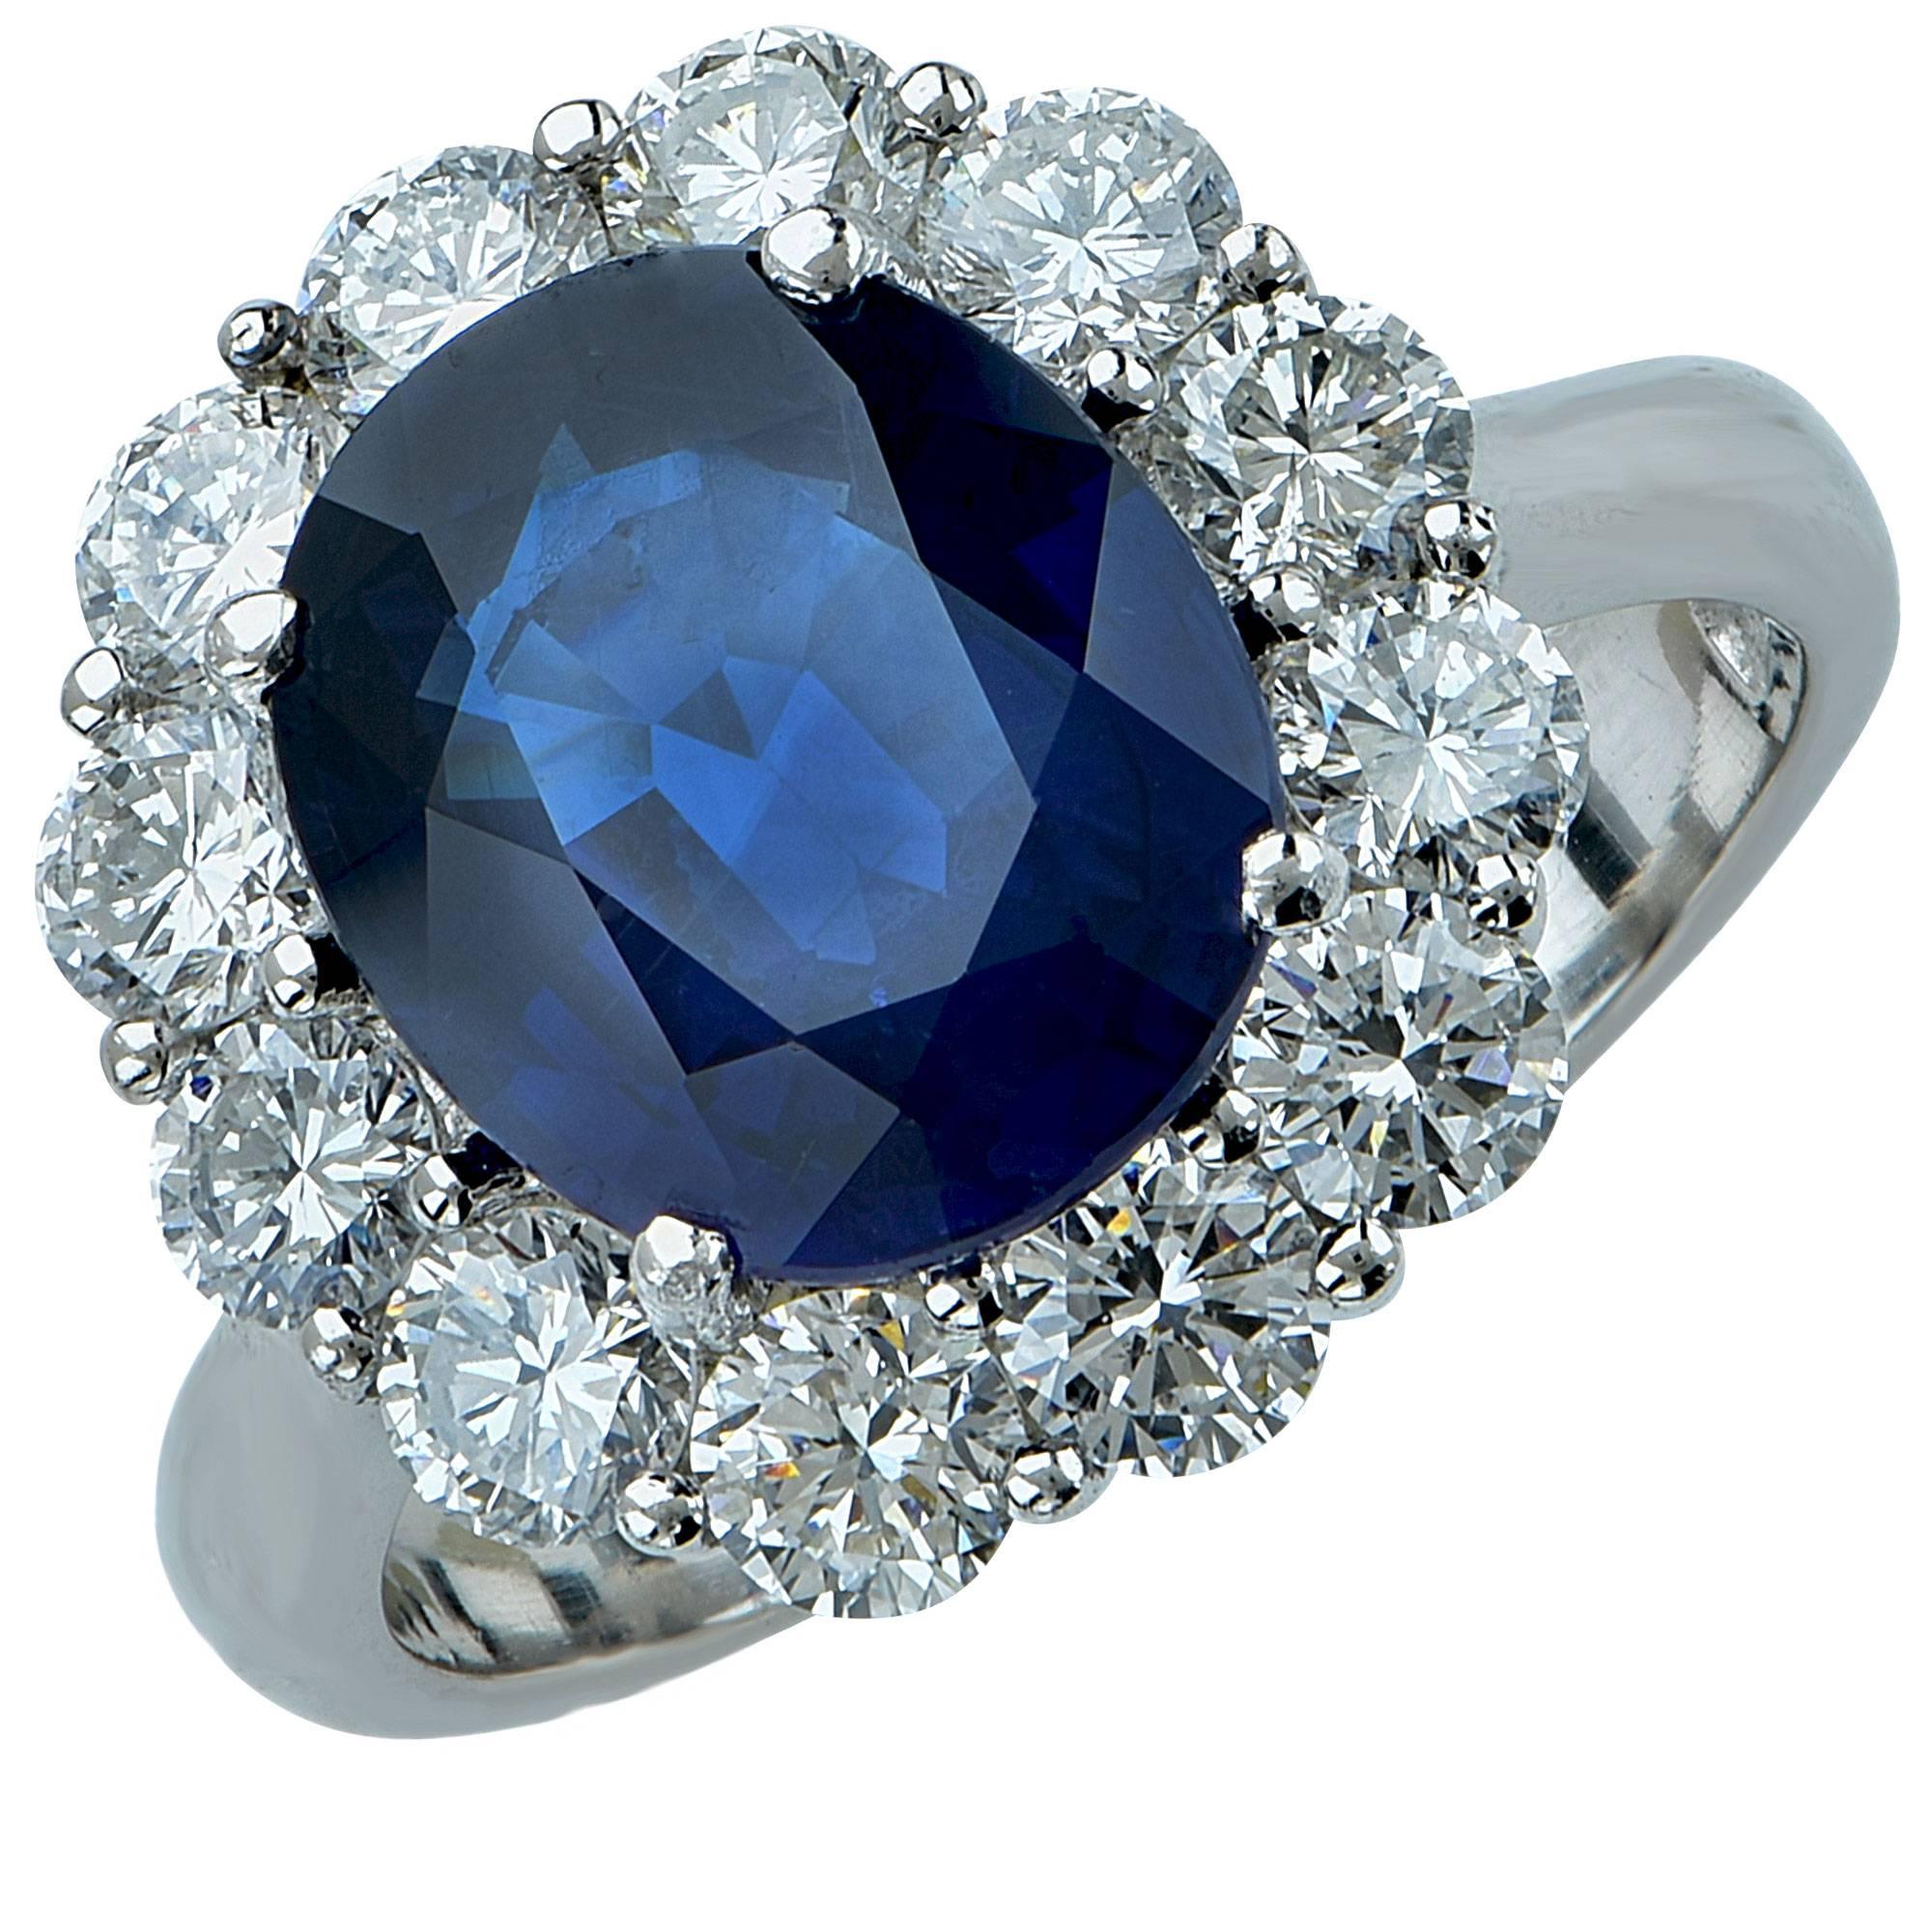 This platinum ring features an AGL graded oval cut sapphire weighing approximately 4.20cts accented by 12 round brilliant cut diamonds weighing approximately 1.80cts total G color VS-SI clarity.

The ring is a size 6.75 and can be sized up or